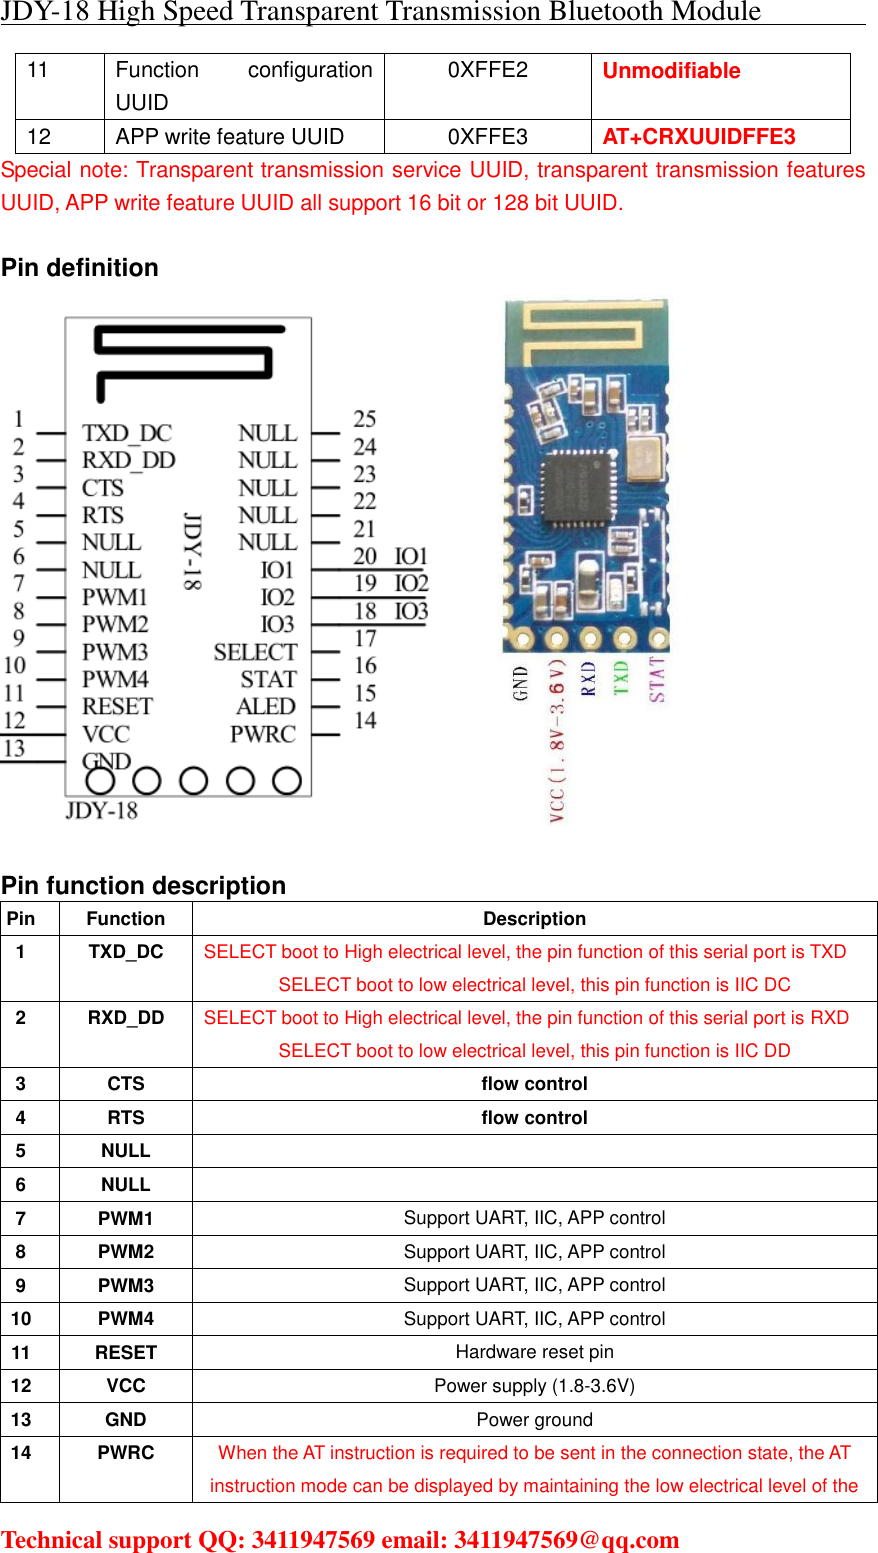 JDY-18 High Speed Transparent Transmission Bluetooth Module                                     Technical support QQ: 3411947569 email: 3411947569@qq.com   11  Function  configuration UUID 0XFFE2  Unmodifiable 12  APP write feature UUID  0XFFE3  AT+CRXUUIDFFE3 Special note: Transparent transmission service UUID, transparent transmission features UUID, APP write feature UUID all support 16 bit or 128 bit UUID.  Pin definition          Pin function description Pin  Function  Description 1  TXD_DC  SELECT boot to High electrical level, the pin function of this serial port is TXD SELECT boot to low electrical level, this pin function is IIC DC 2  RXD_DD  SELECT boot to High electrical level, the pin function of this serial port is RXD SELECT boot to low electrical level, this pin function is IIC DD 3  CTS  flow control 4  RTS  flow control 5  NULL   6  NULL   7  PWM1  Support UART, IIC, APP control 8  PWM2  Support UART, IIC, APP control 9  PWM3  Support UART, IIC, APP control 10  PWM4  Support UART, IIC, APP control 11  RESET  Hardware reset pin 12  VCC  Power supply (1.8-3.6V) 13  GND  Power ground 14  PWRC  When the AT instruction is required to be sent in the connection state, the AT instruction mode can be displayed by maintaining the low electrical level of the 